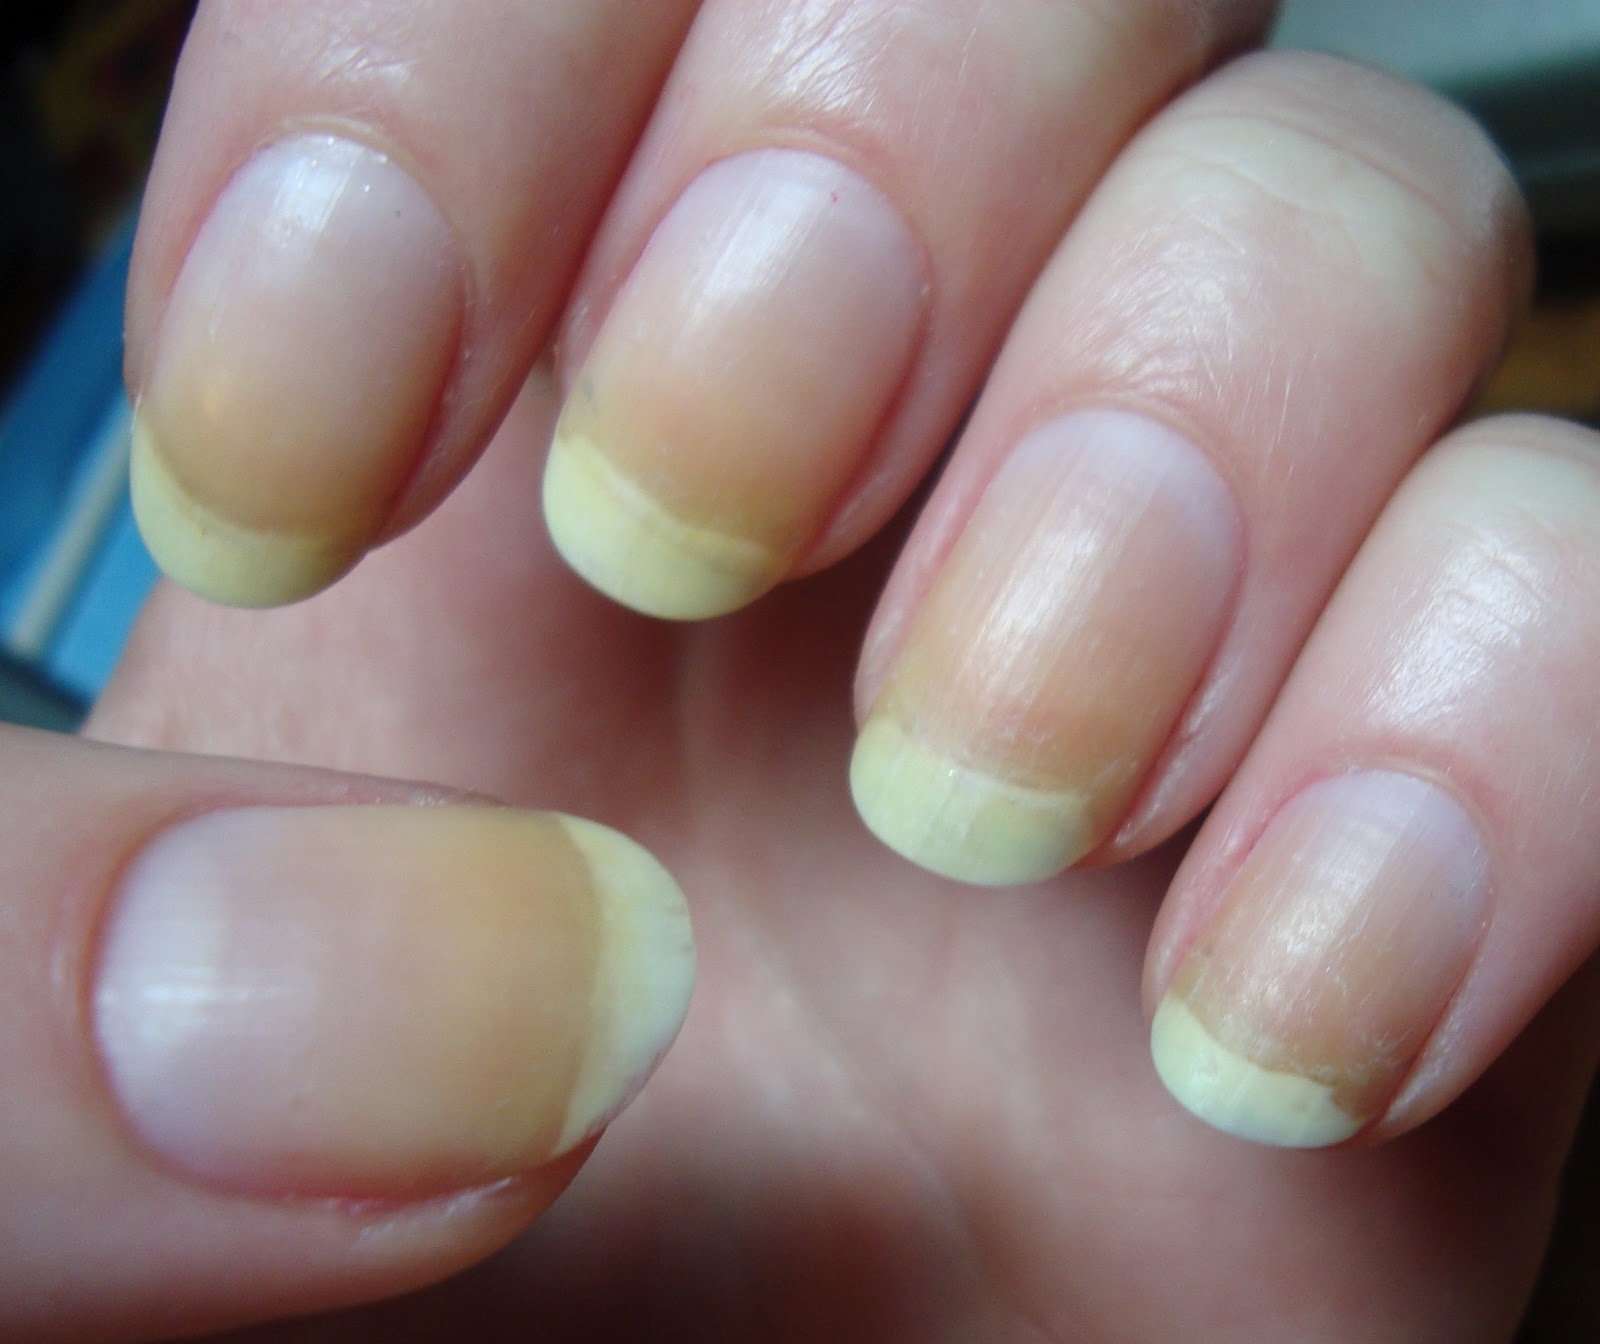 5 Fast Ways To Treat Discolored Nails » News,Business ...